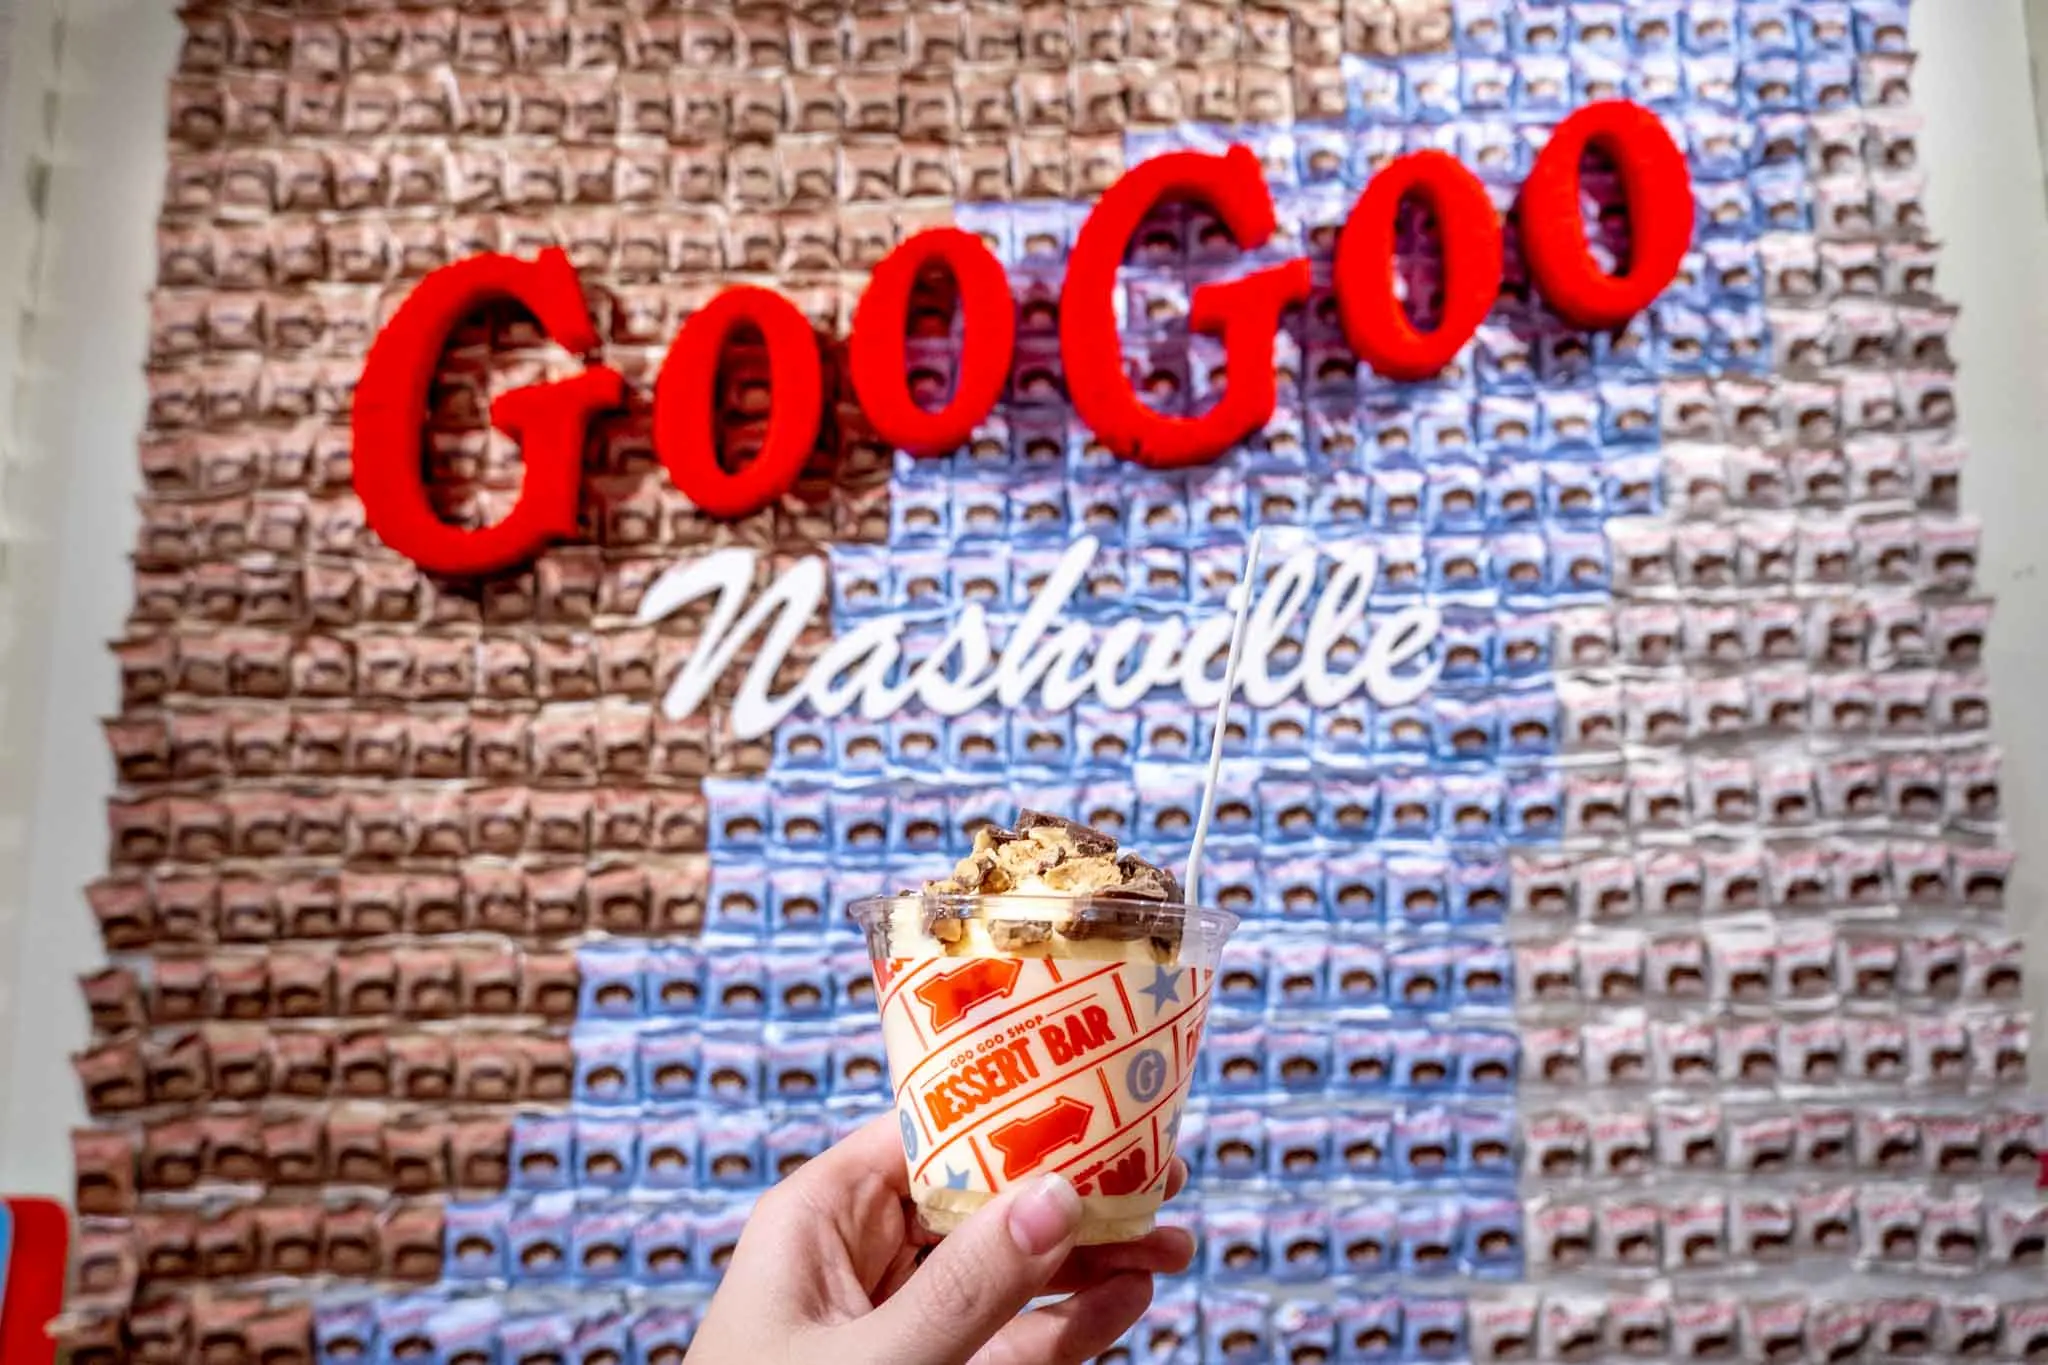 Hand holding a cup of ice cream topped with candy in front of a decorated wall with a sign: Goo Goo Nashville